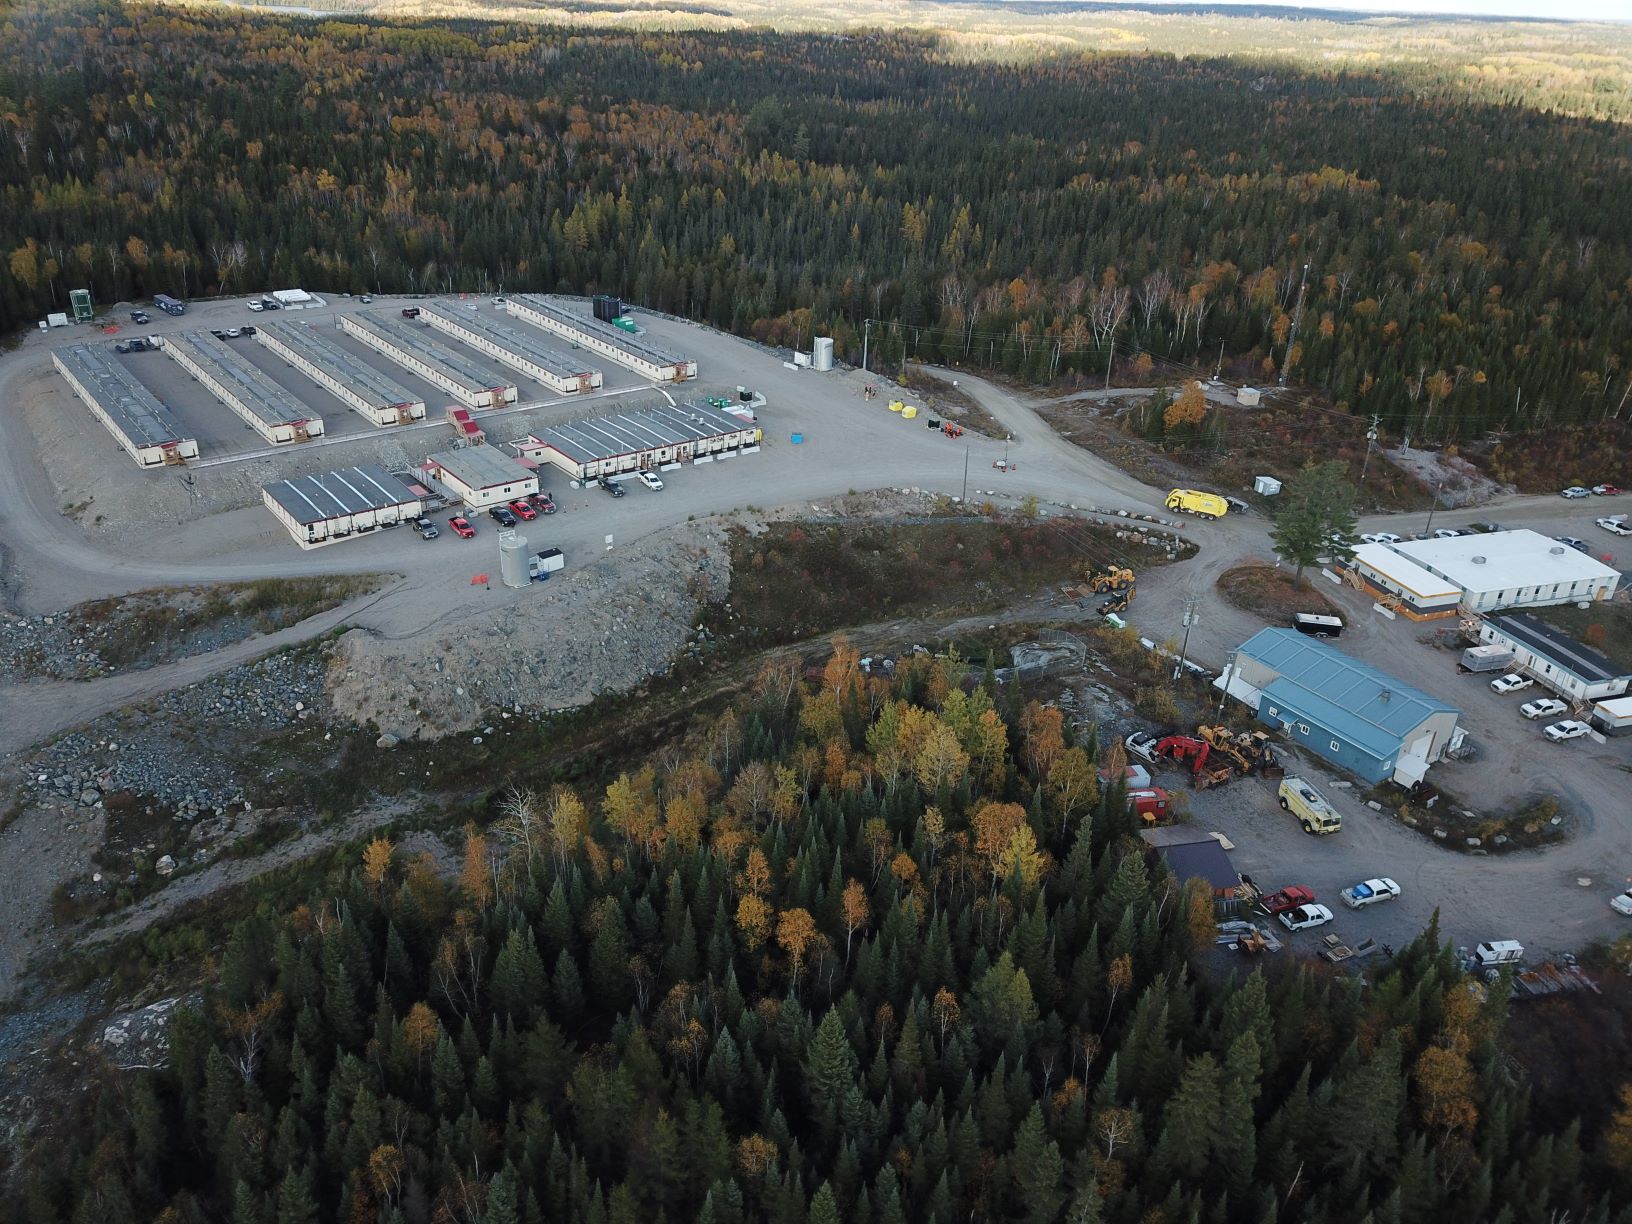 The Cote gold mine, one of the mines under construction in Canada